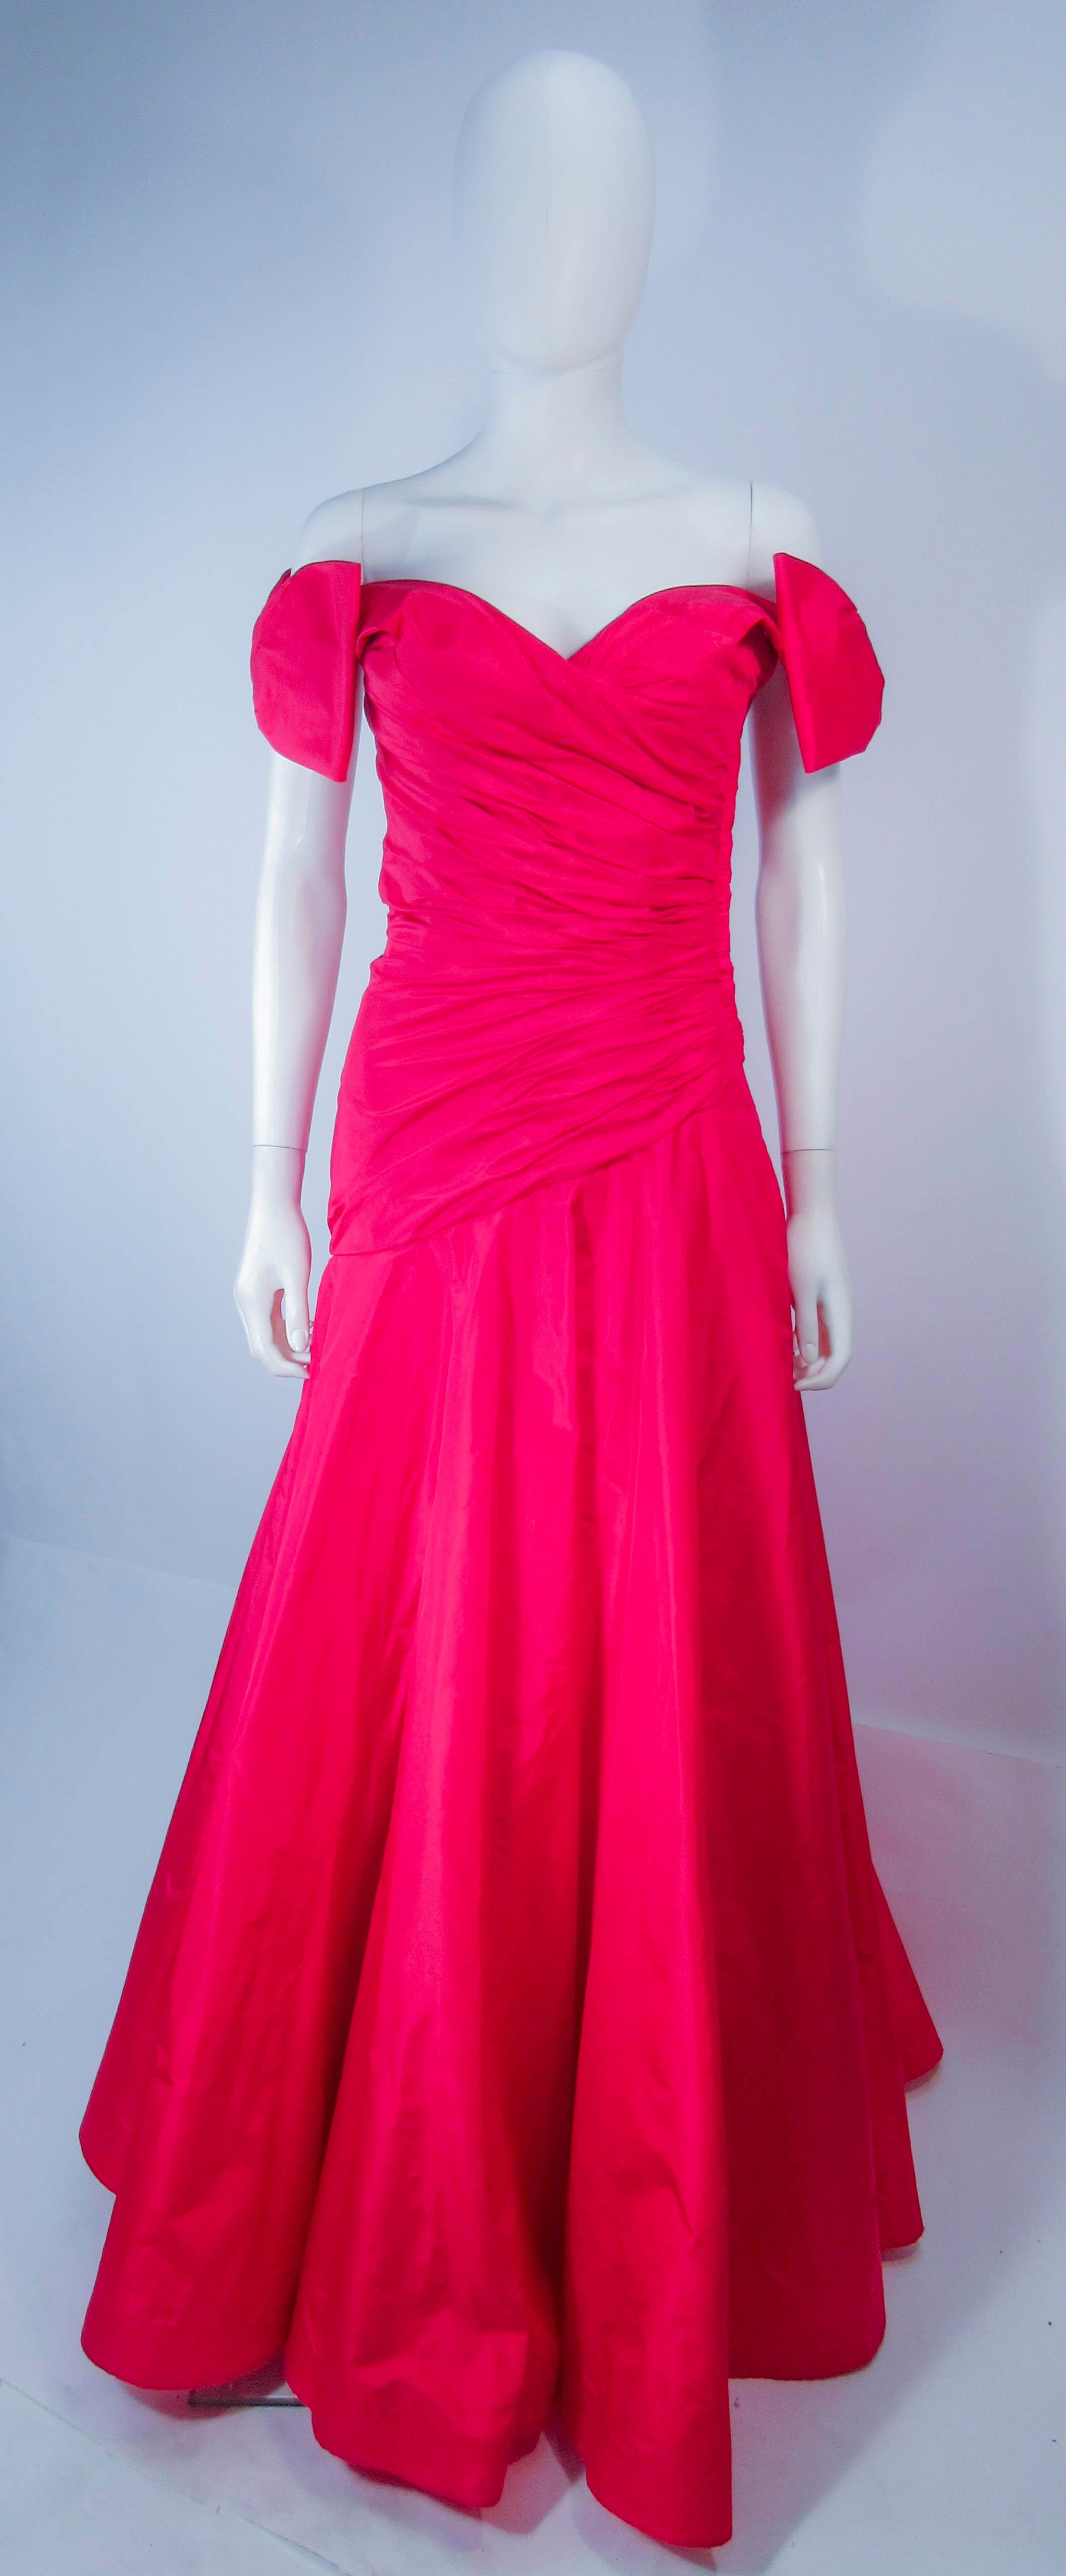 This Murray Arbeid design is composed of a beautiful red silk taffeta. Features a gorgeous cascading ruched detail with a wide sweeping hem and large bows at the shoulders. There is a side zipper closure. In excellent vintage condition (see photos).